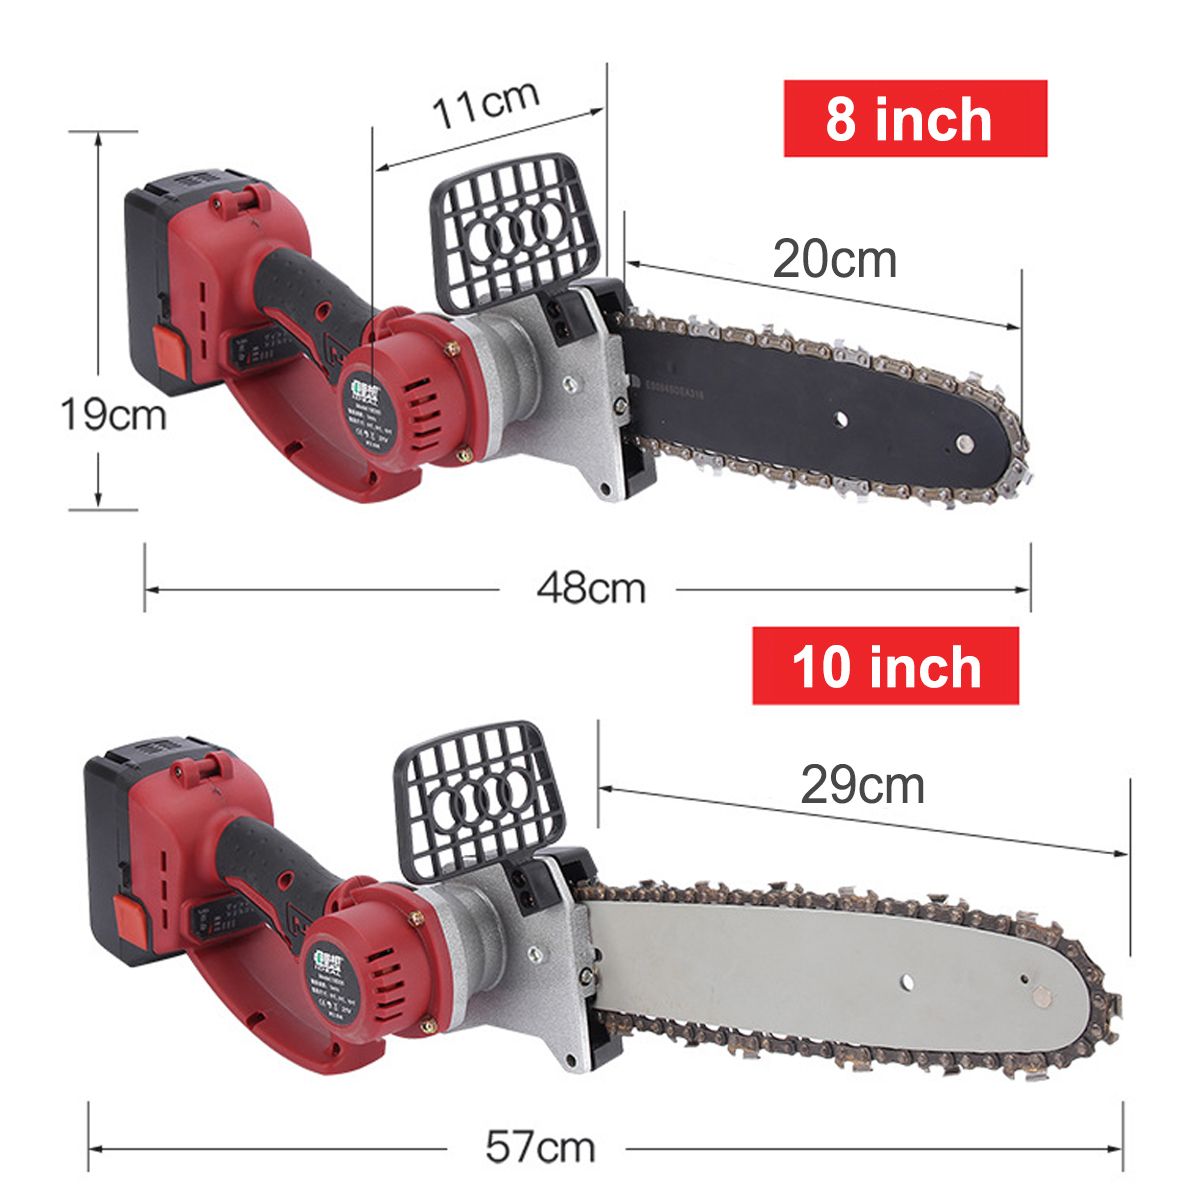 810-30Ah-Mini-Portable-Electric-Cordless-Chainsaw-Chain-Saw-One-Hand-Saw-Woodworking-Garden-Cutting--1699122